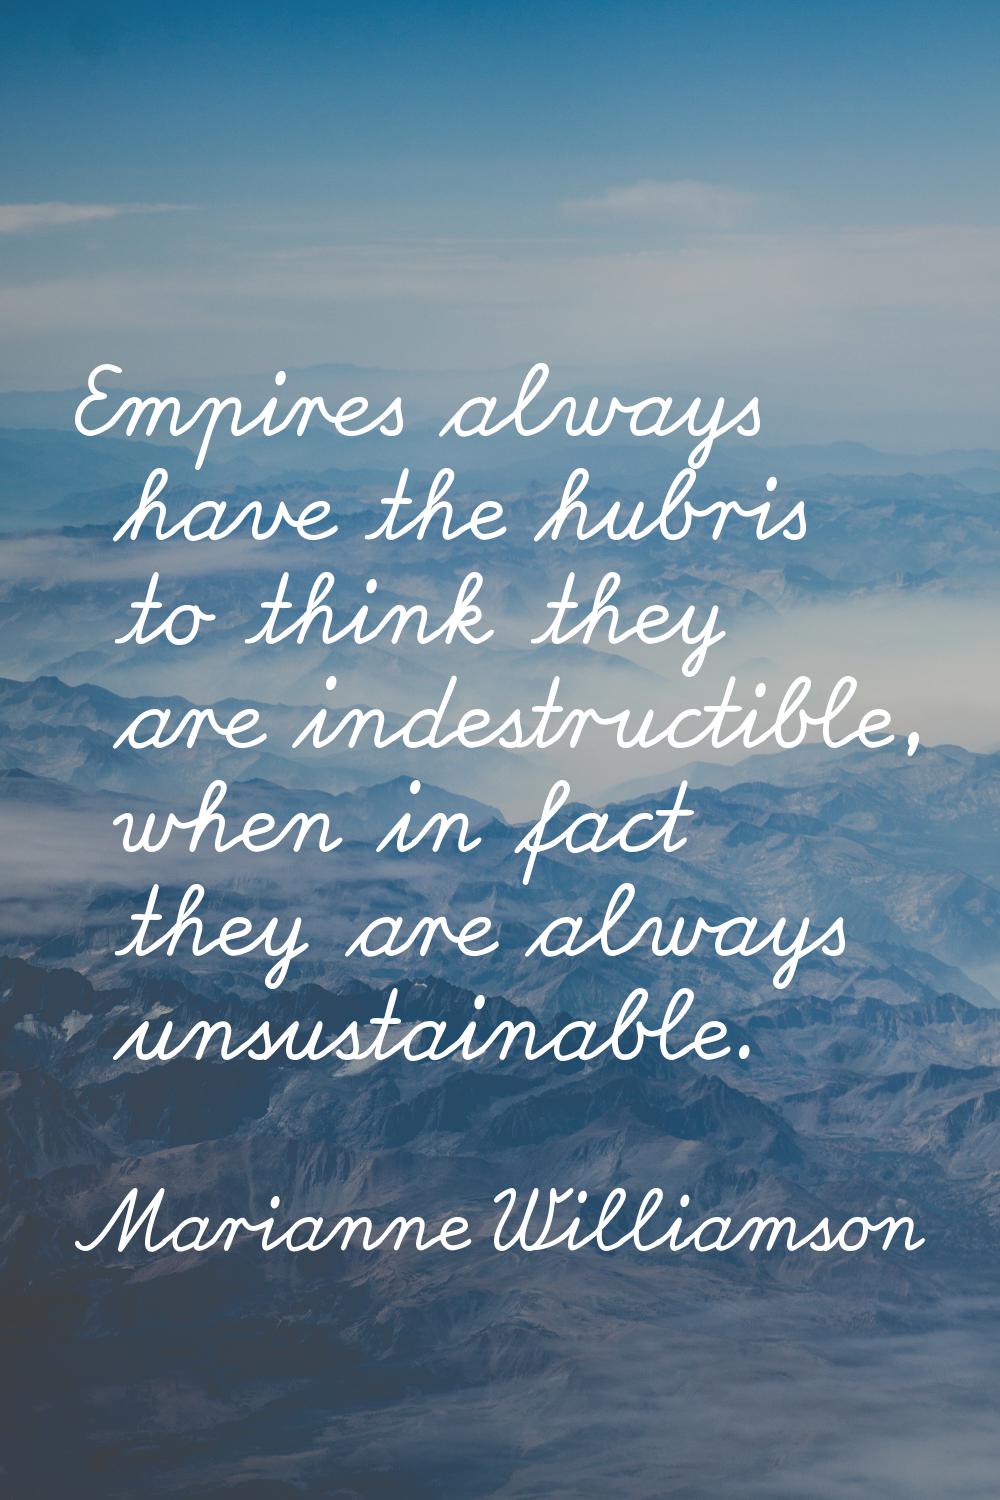 Empires always have the hubris to think they are indestructible, when in fact they are always unsus